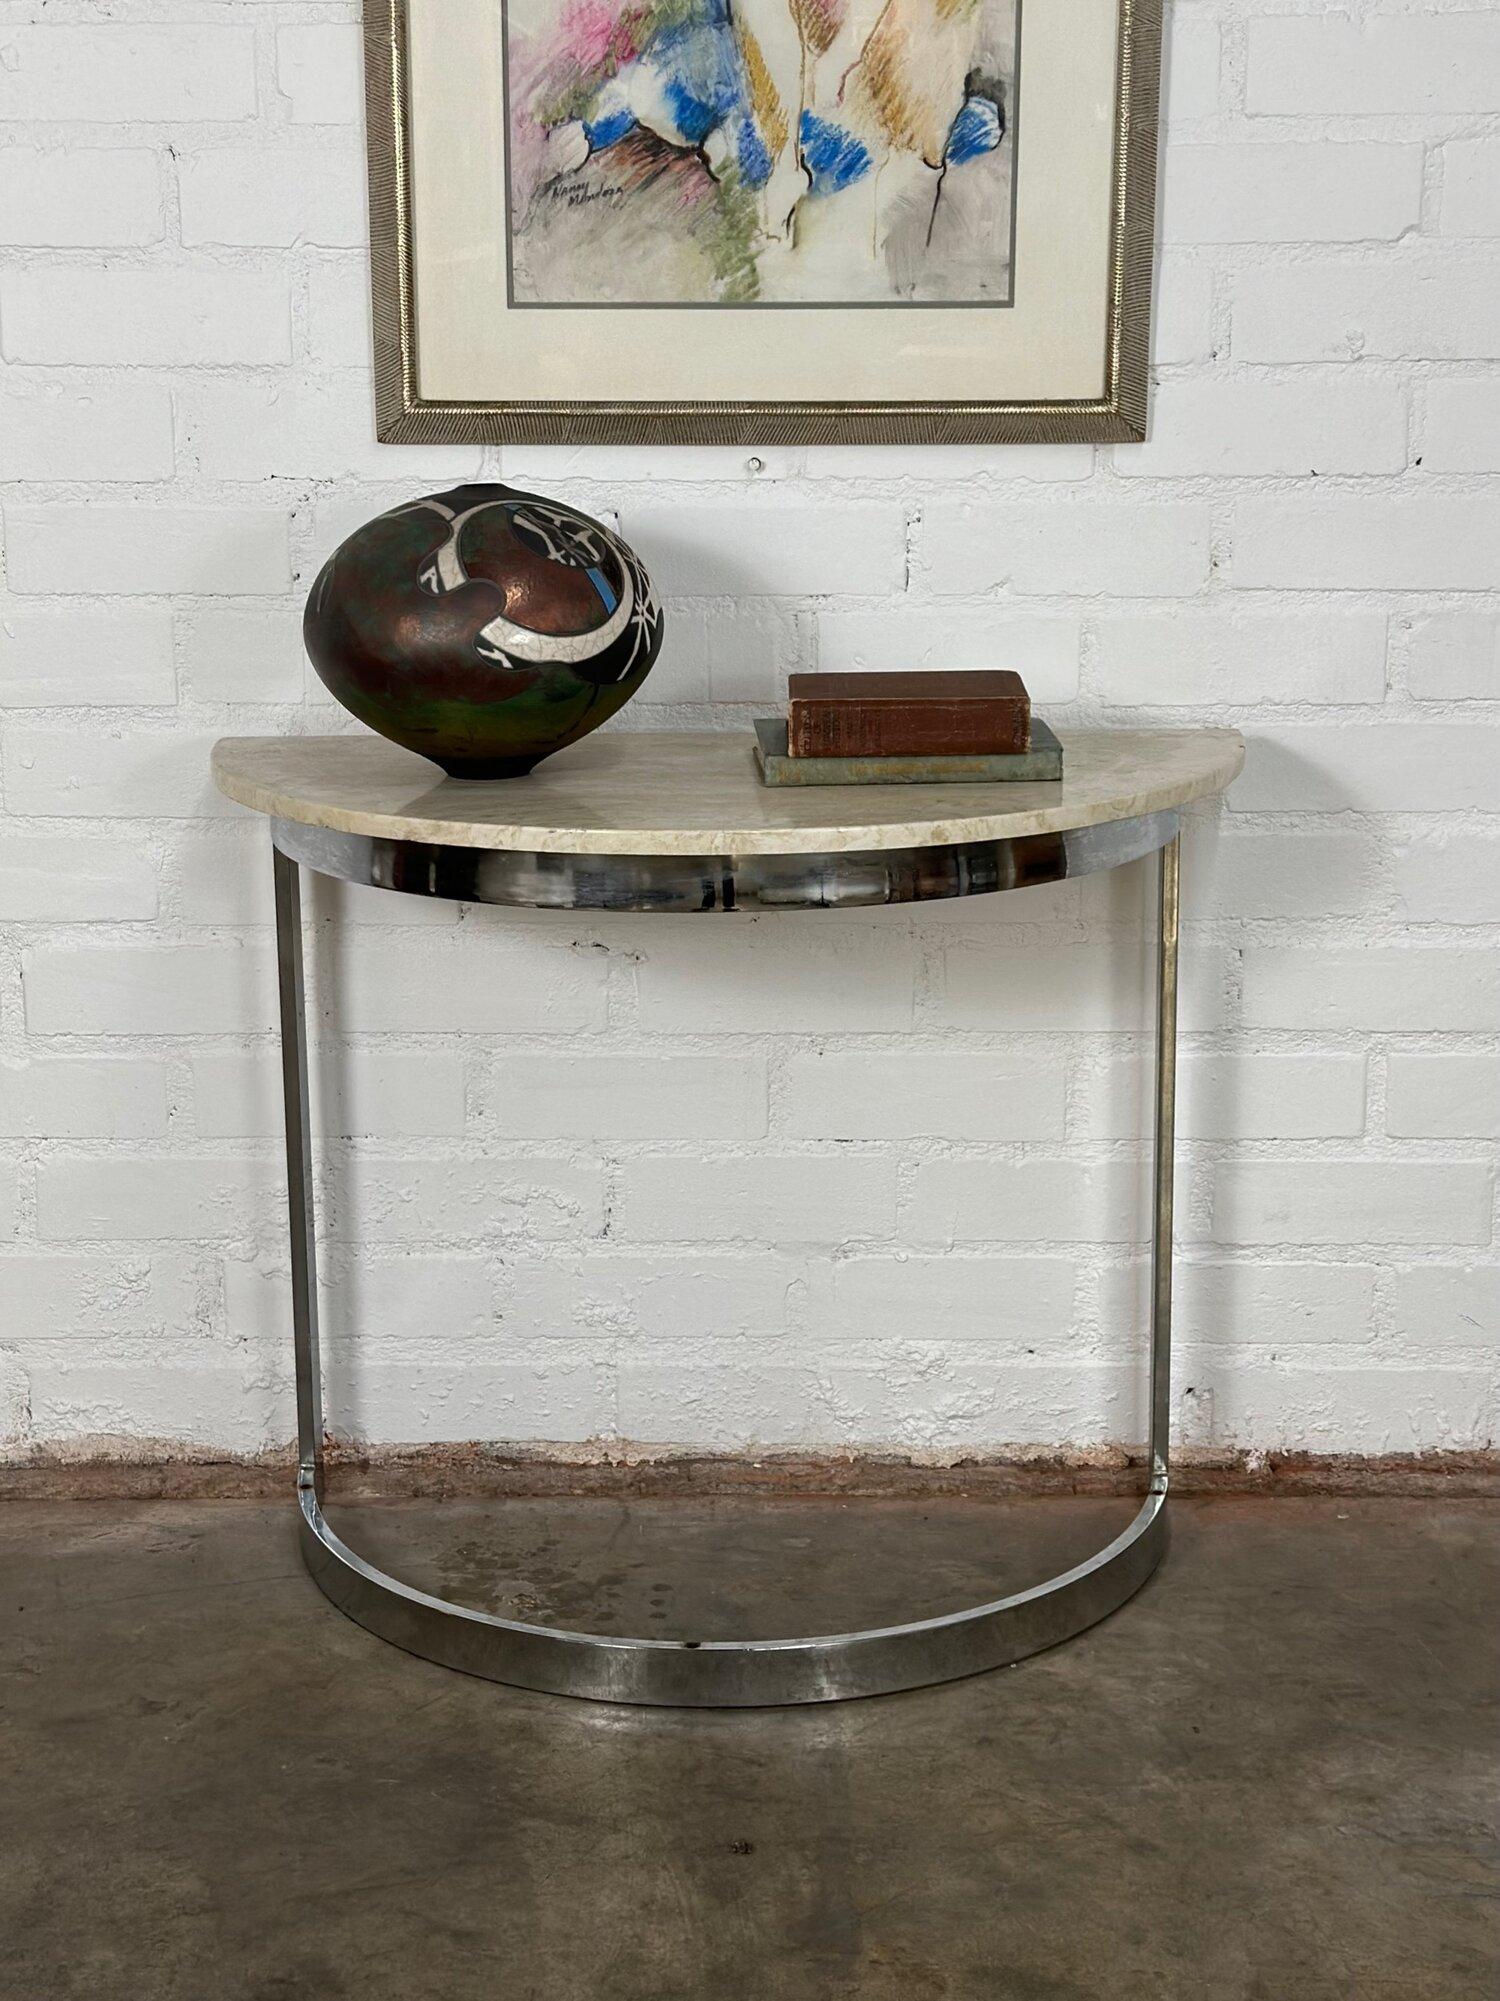 W36 D18 H28.5

Half moon console in good vintage condition. Item has no large visible breaks and both the marble and chrome base are structurally sound. Top surface comes off for easy transportation.